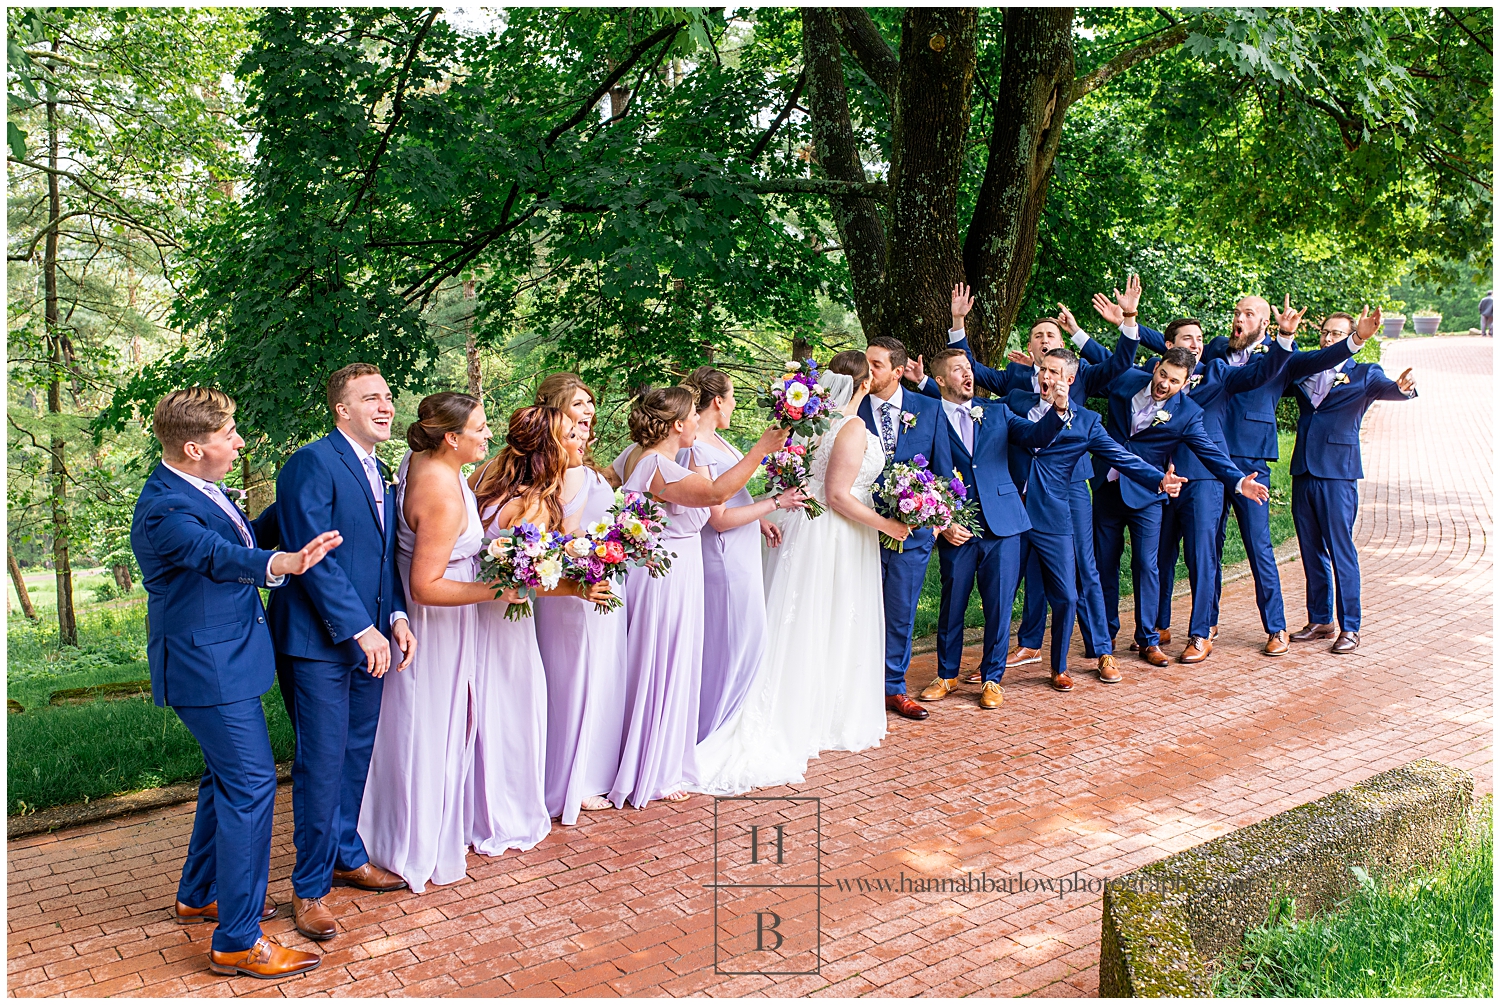 Bridal party cheers as bride and groom kiss.